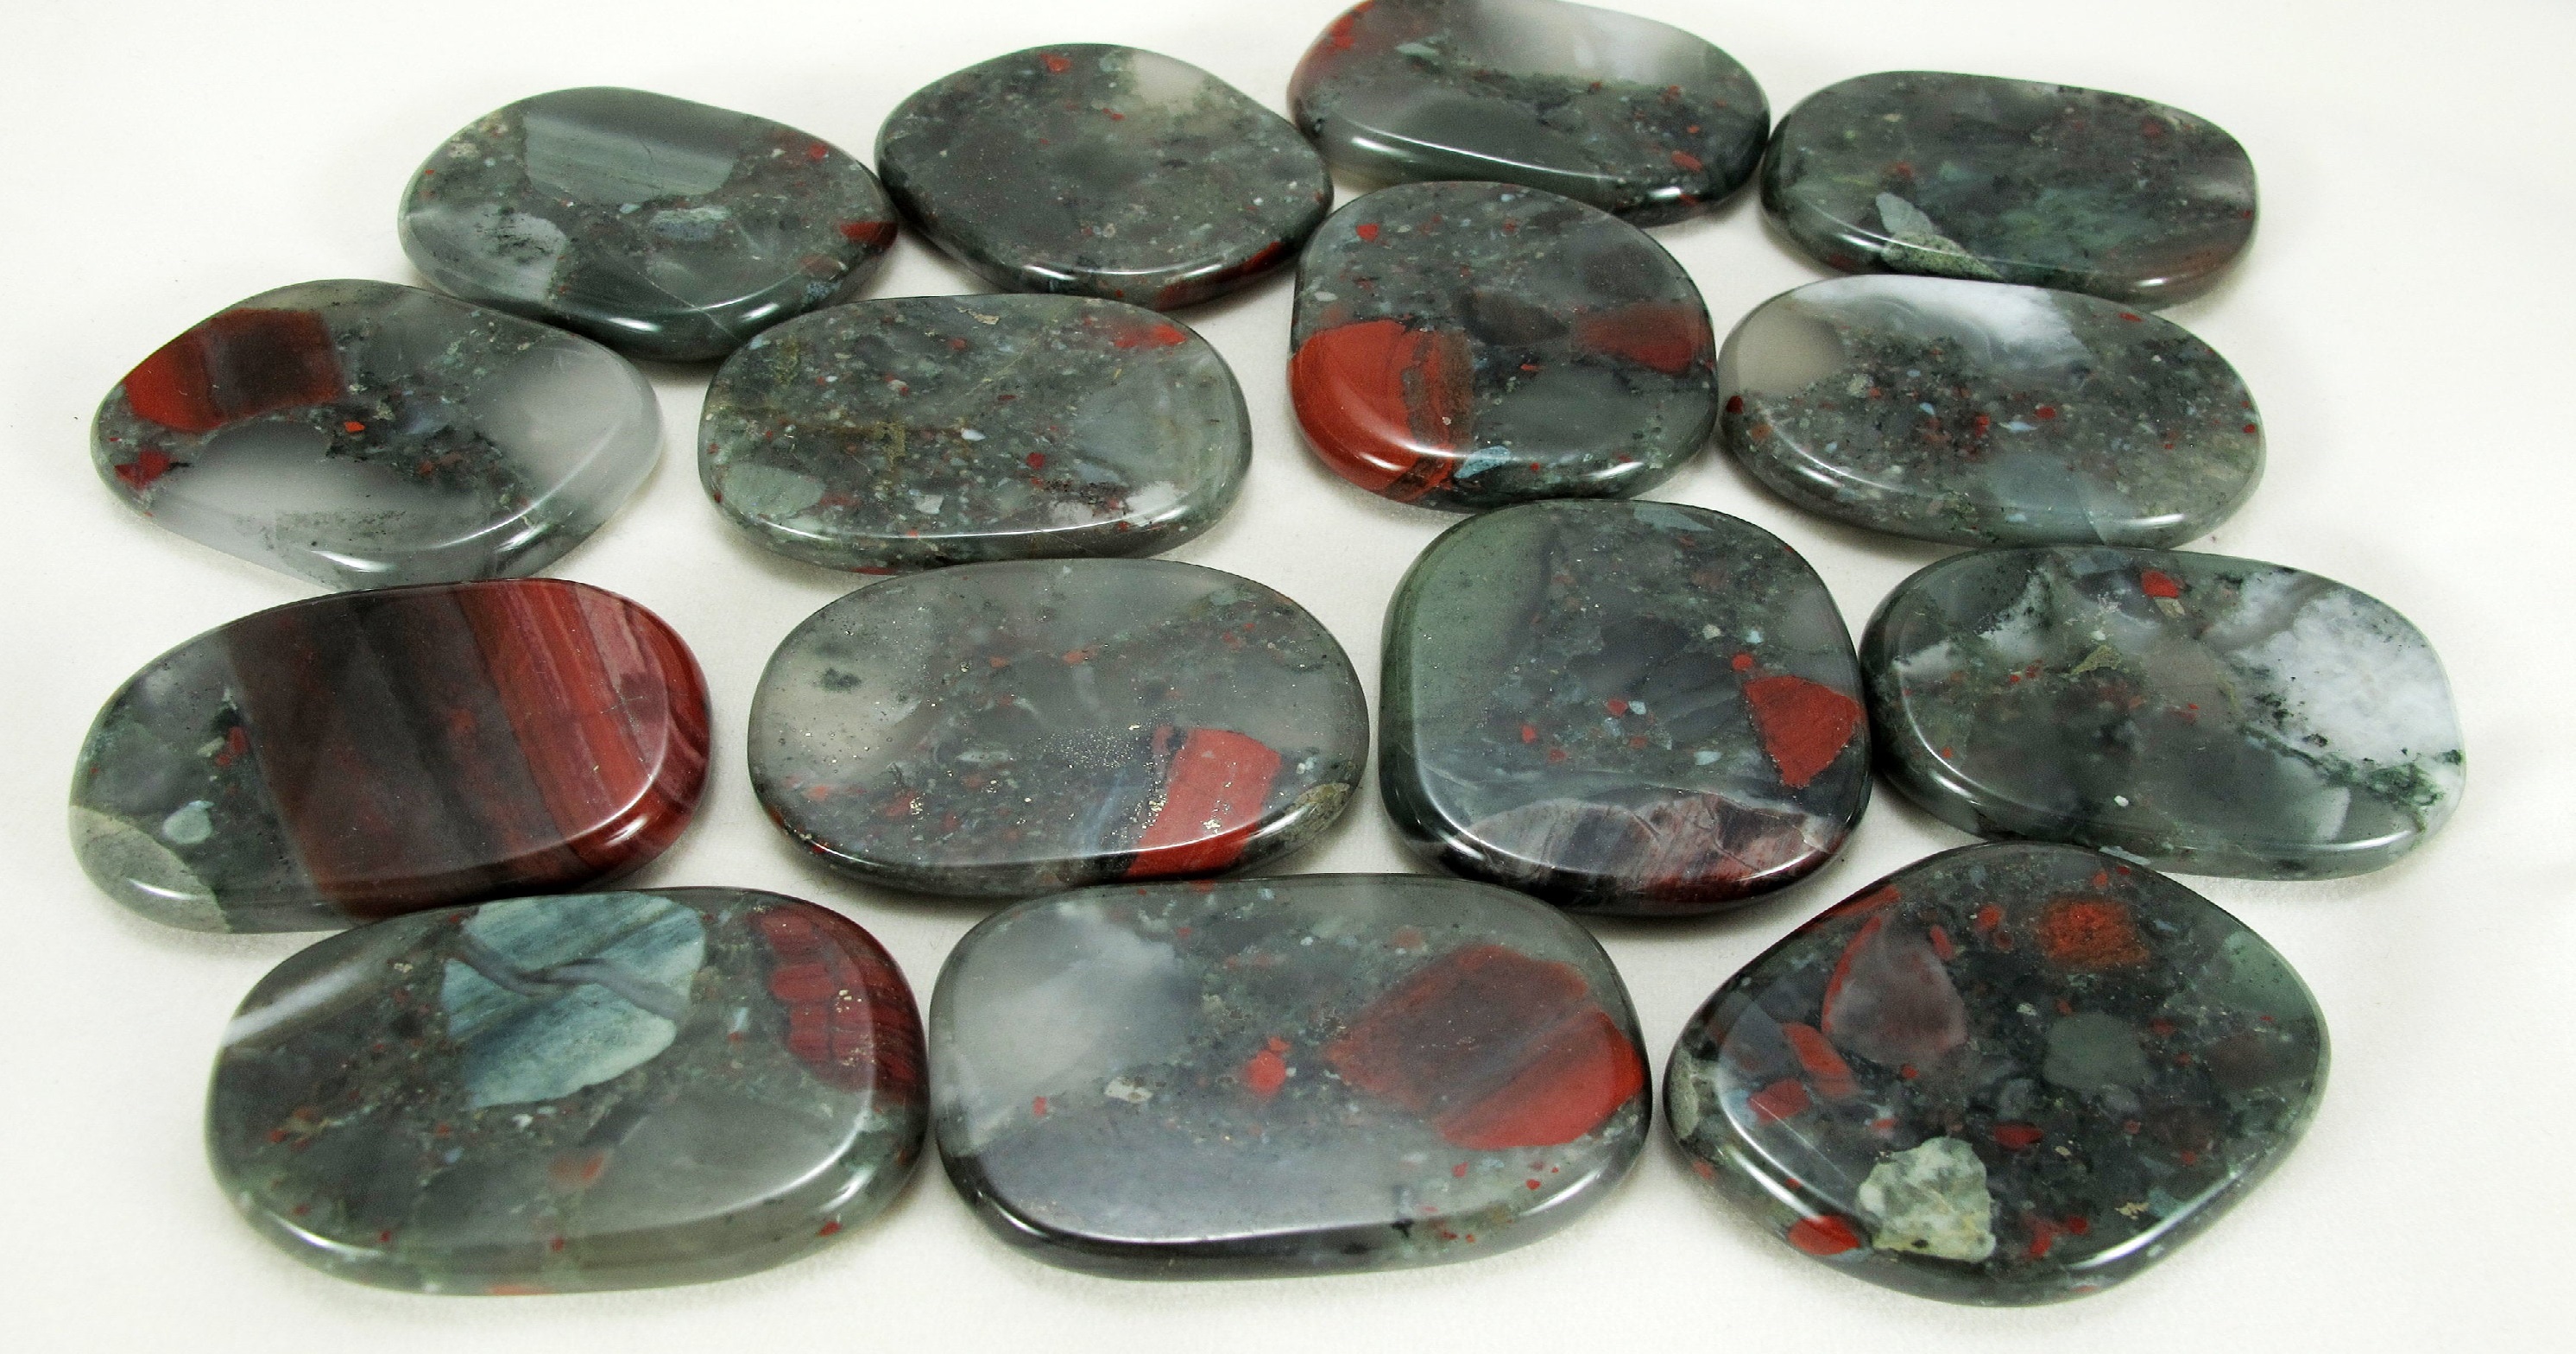 The Healing Crystals for Iron Deficiency